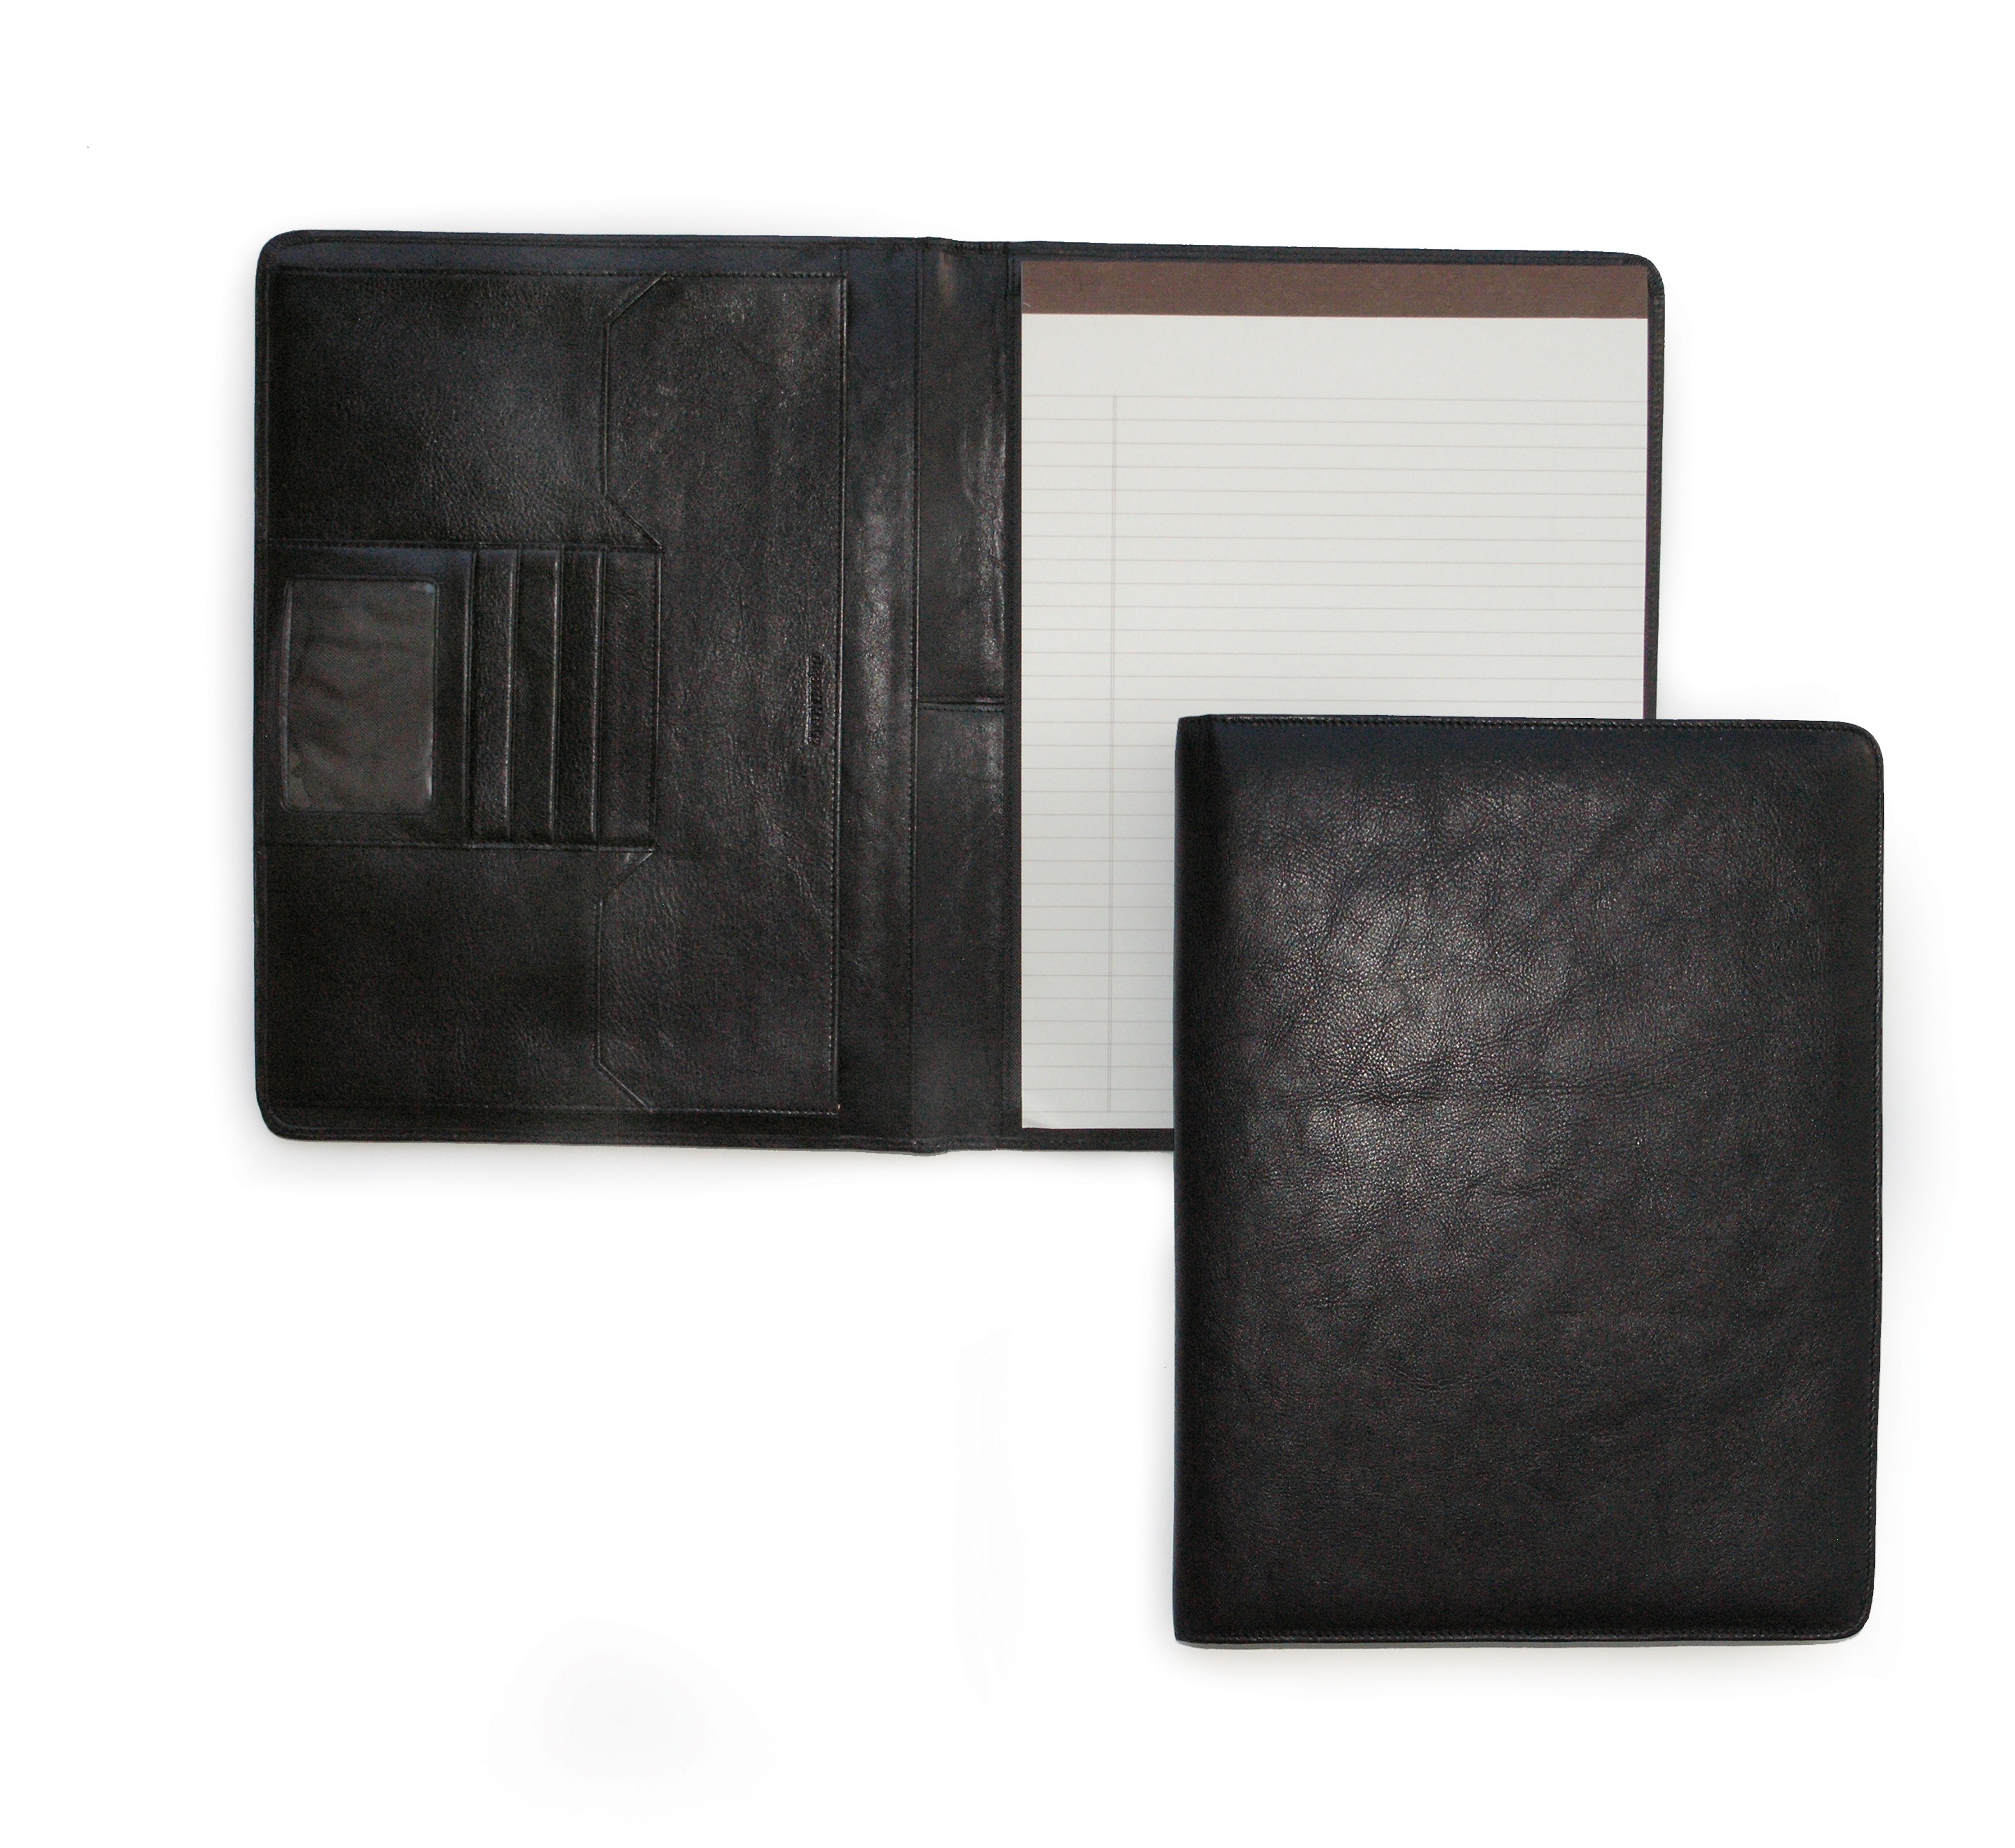 Osgoode Marley #1831 Deluxe File Leather Pad